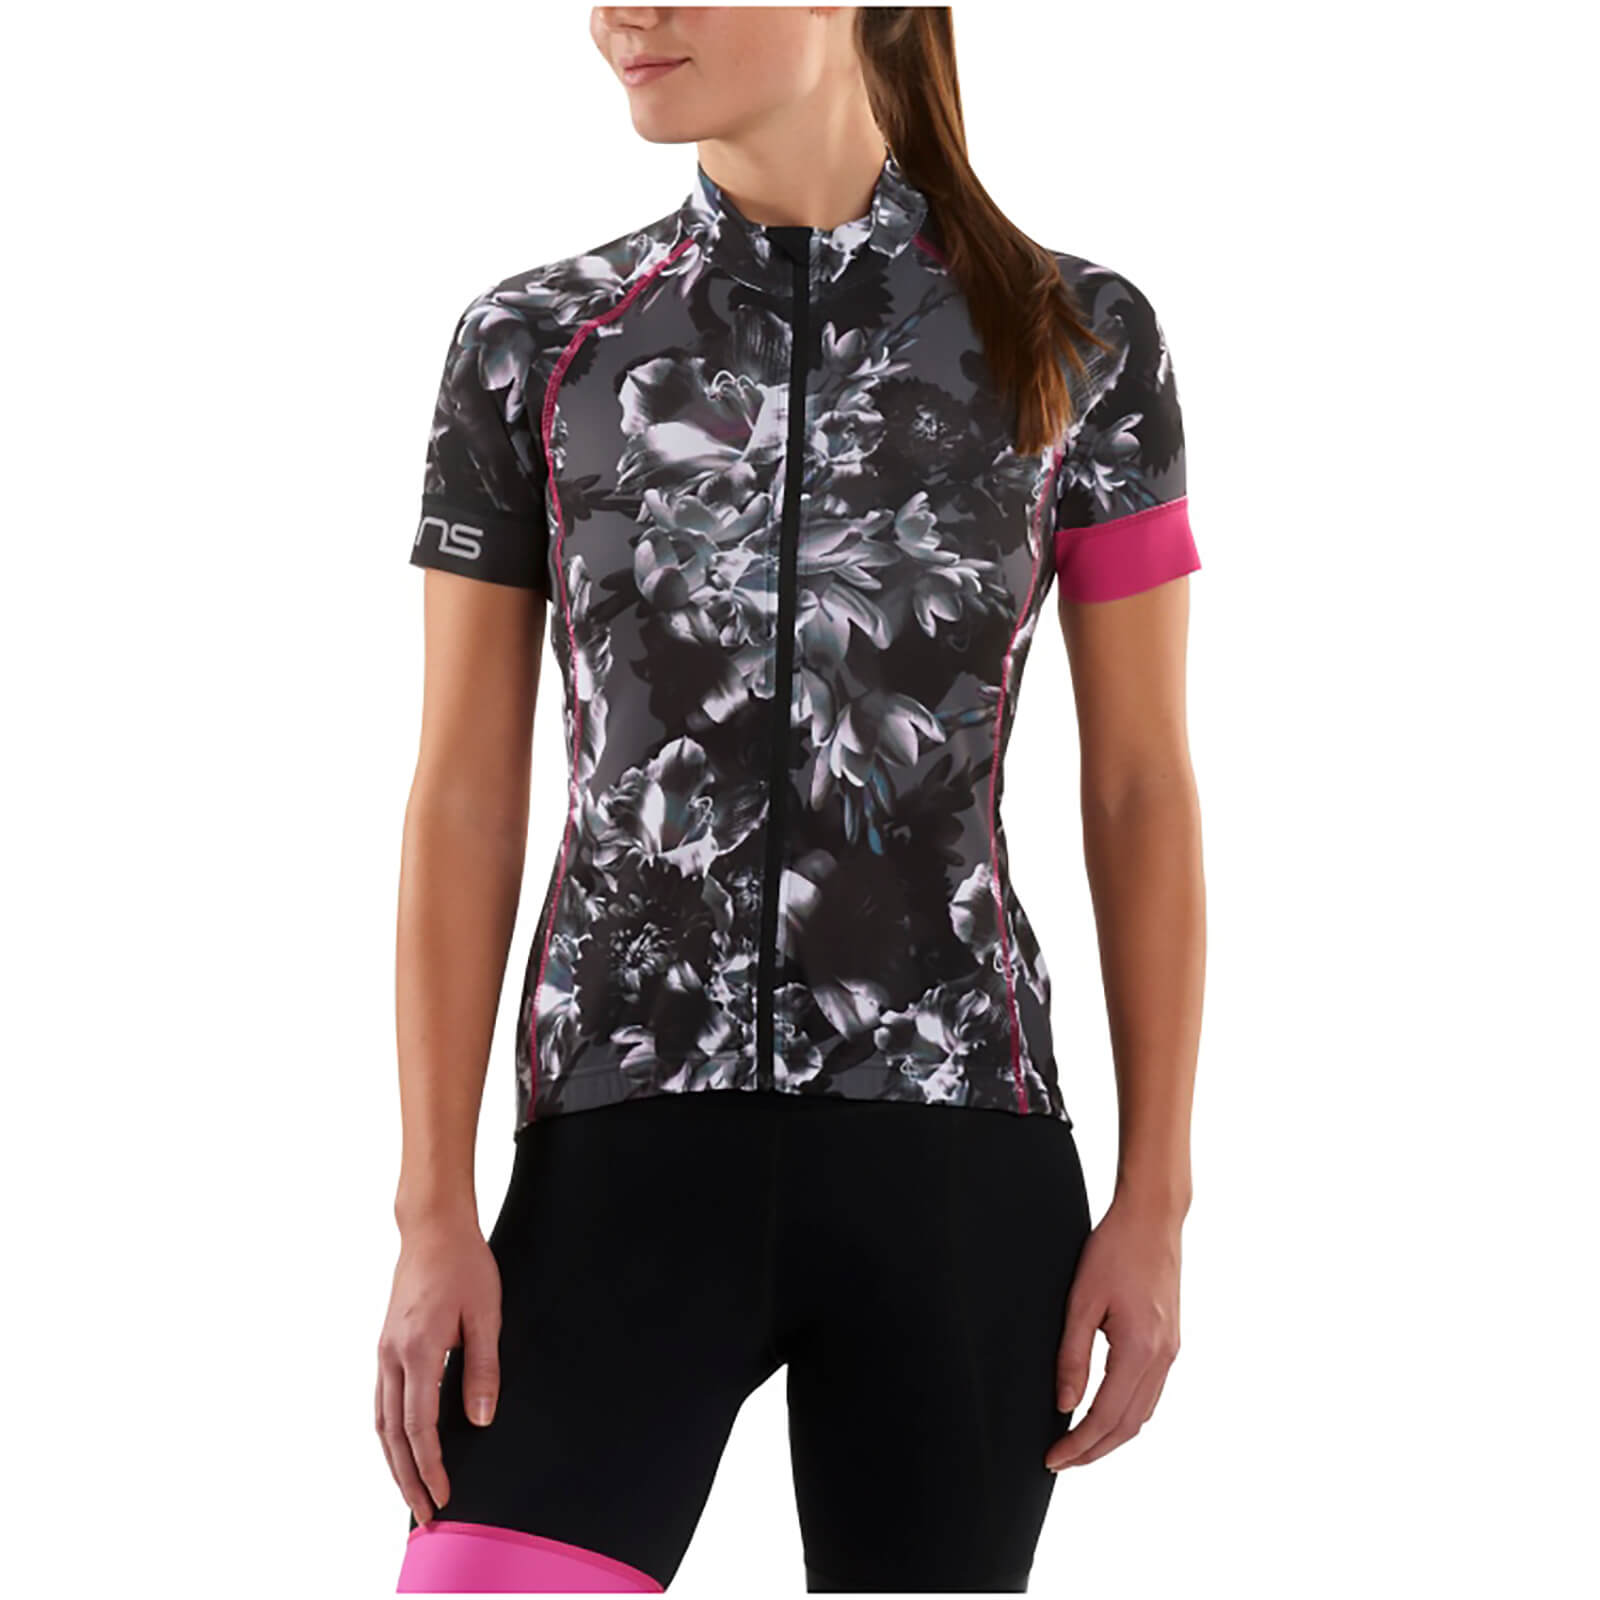 skins cycling jersey